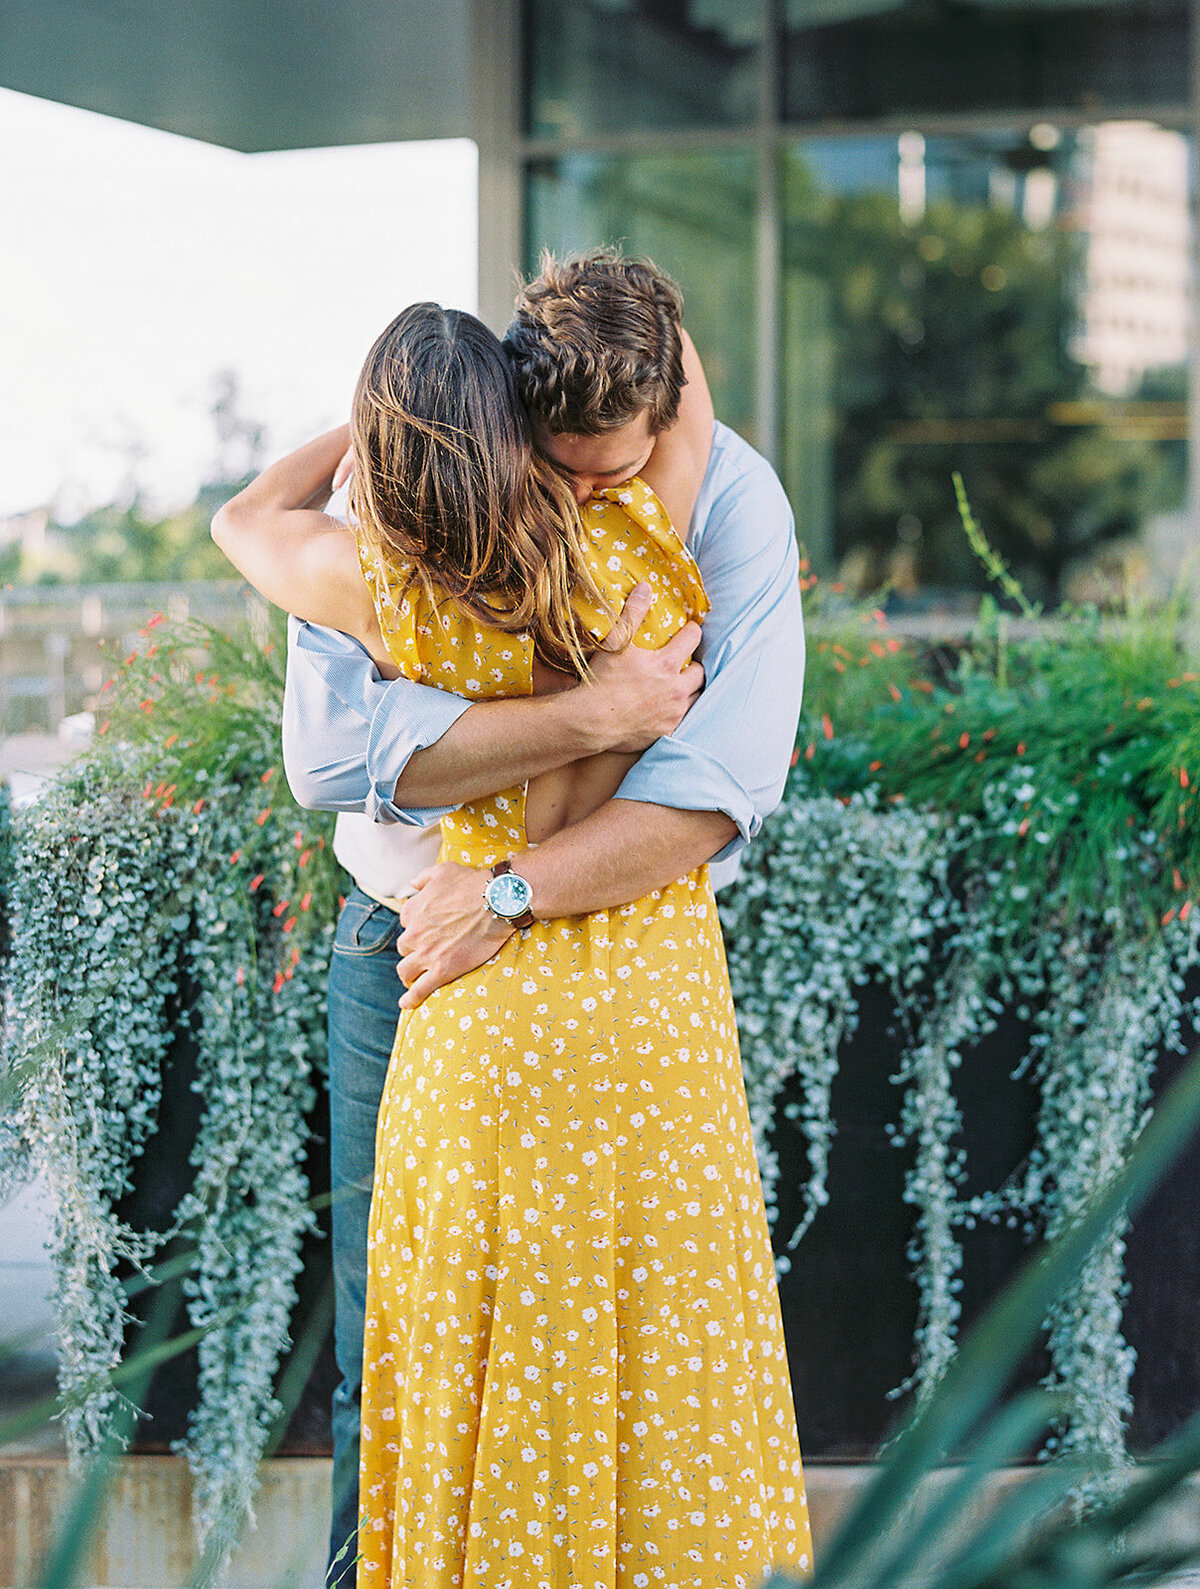 Man hugging woman in a yellow floral dress